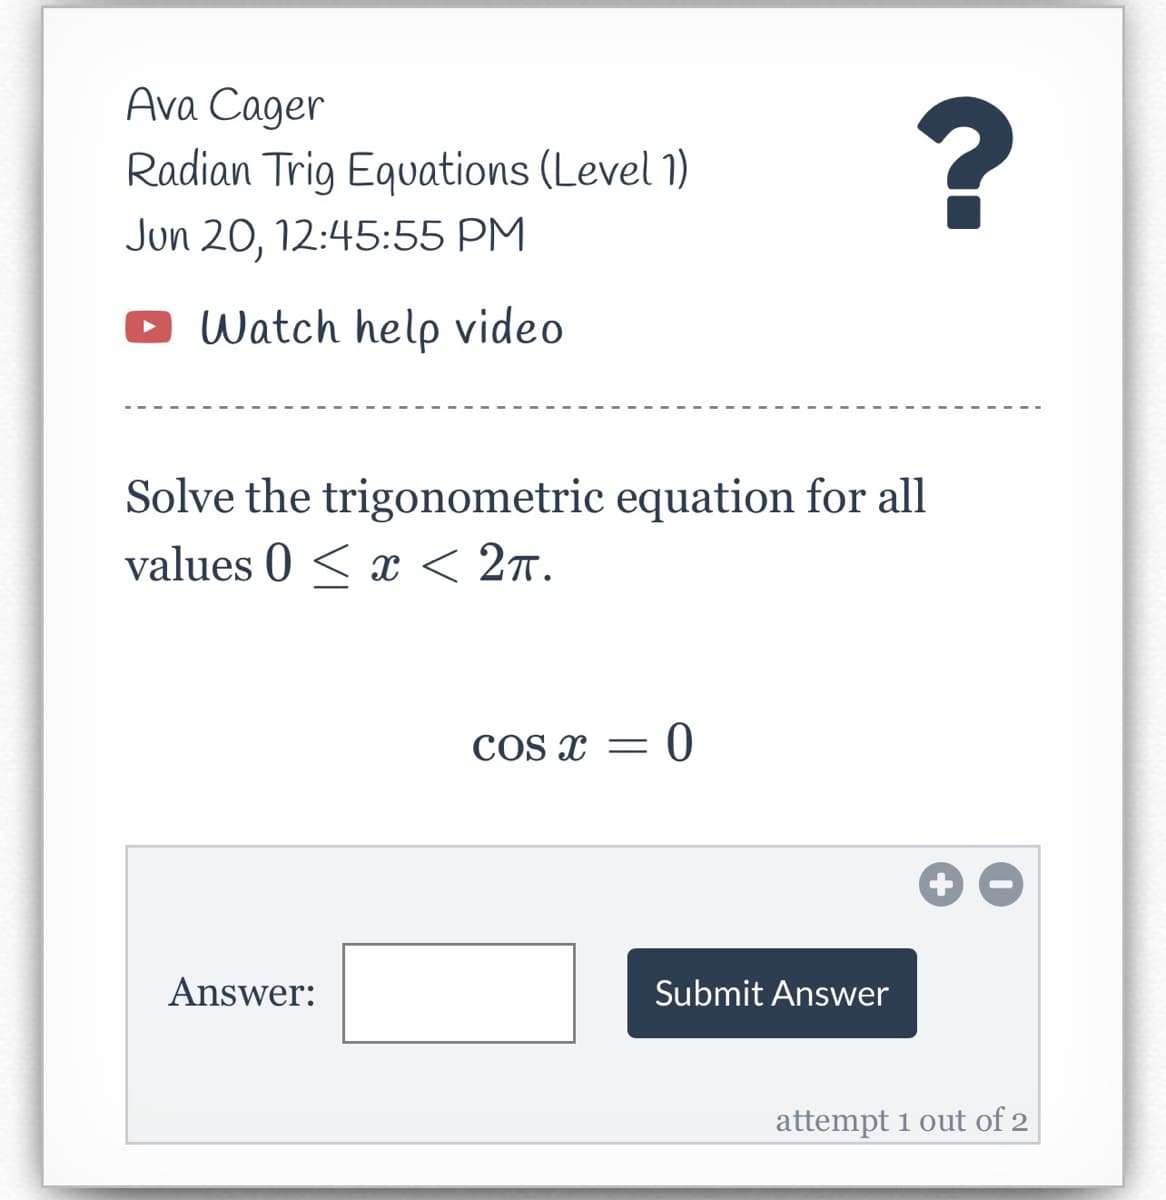 Ava Cager
Radian Trig Equations (Level 1)
Jun 20, 12:45:55 PM
Watch help video
Solve the trigonometric equation for all
values 0 < x < 2π.
COS X = = 0
Answer:
Submit Answer
?
attempt 1 out of 2